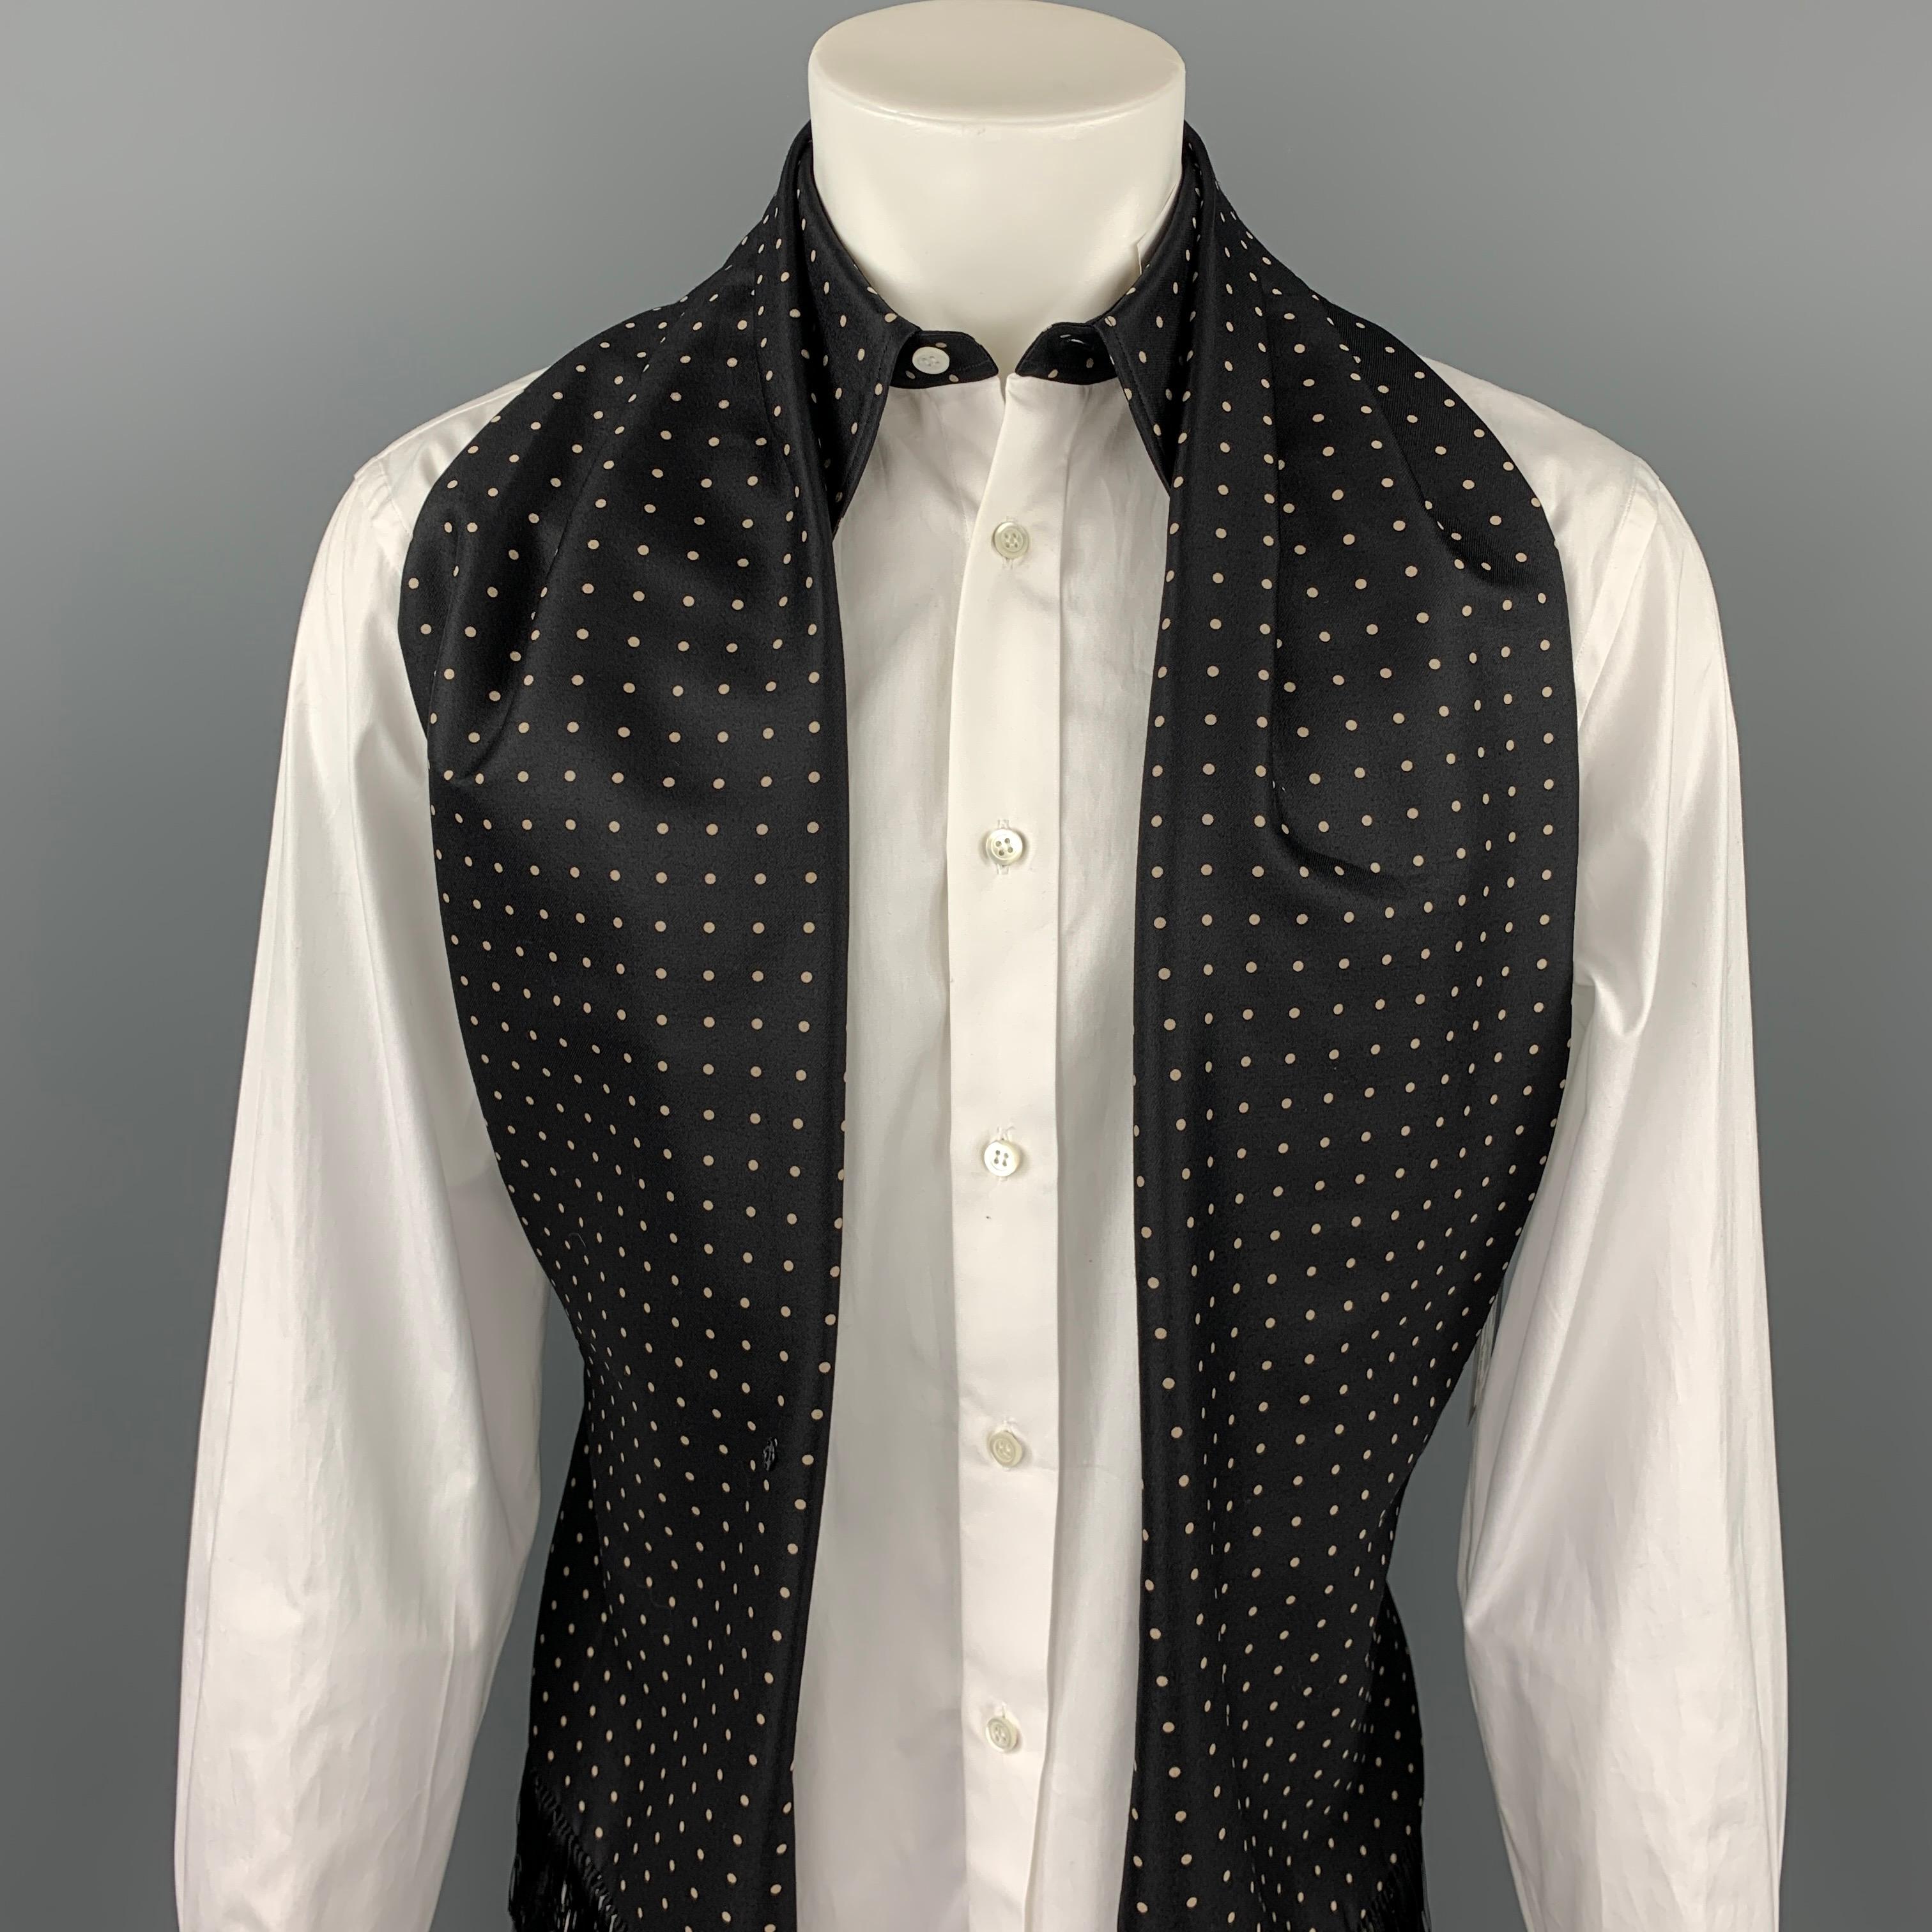 ALEXANDER MCQUEEN long sleeve shirt comes in a white cotton with a back belt black dot print scarf vest design featuring a button up style and a spread collar. Made in Italy.

New With Tags. 
Marked: IT 50
Original Retail Price: